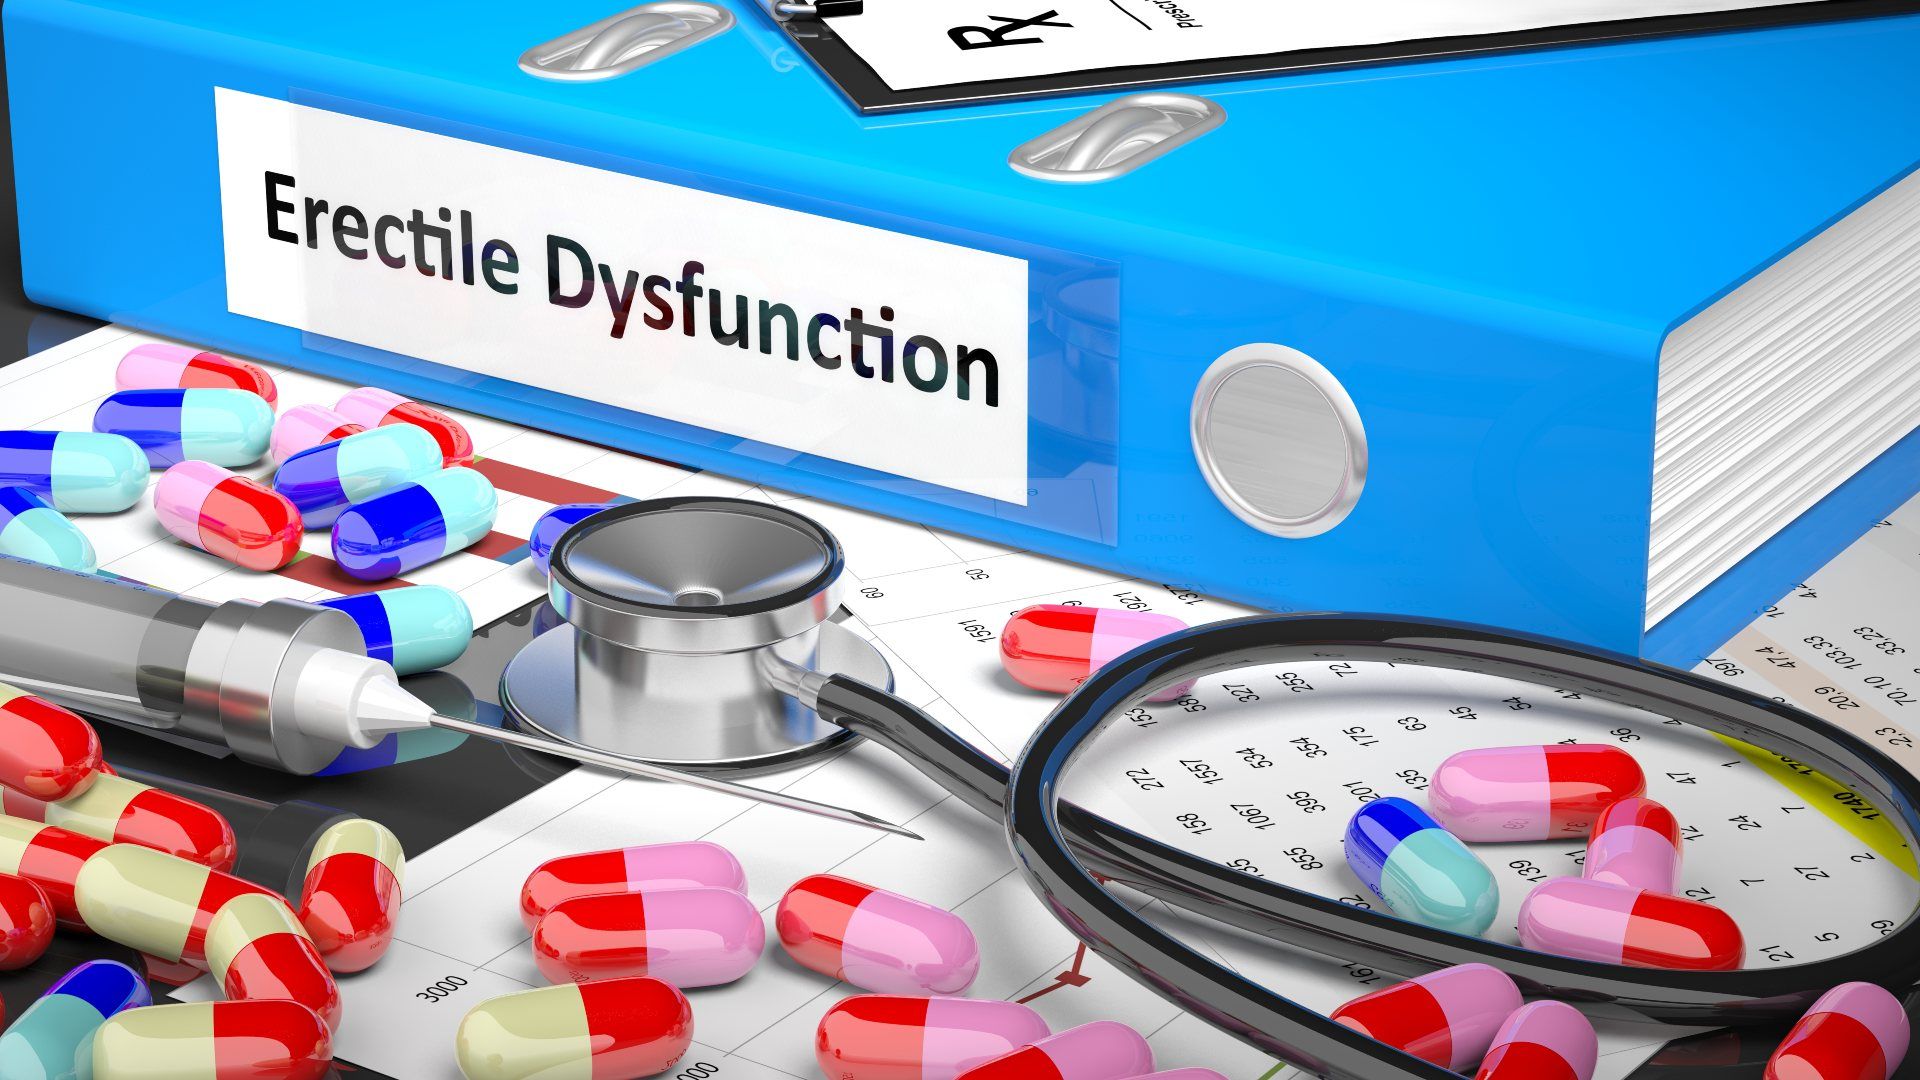 A binder reading "erectile dysfunction" on the spine lies near pills, a syringe and a stethoscope - Primal Max Red